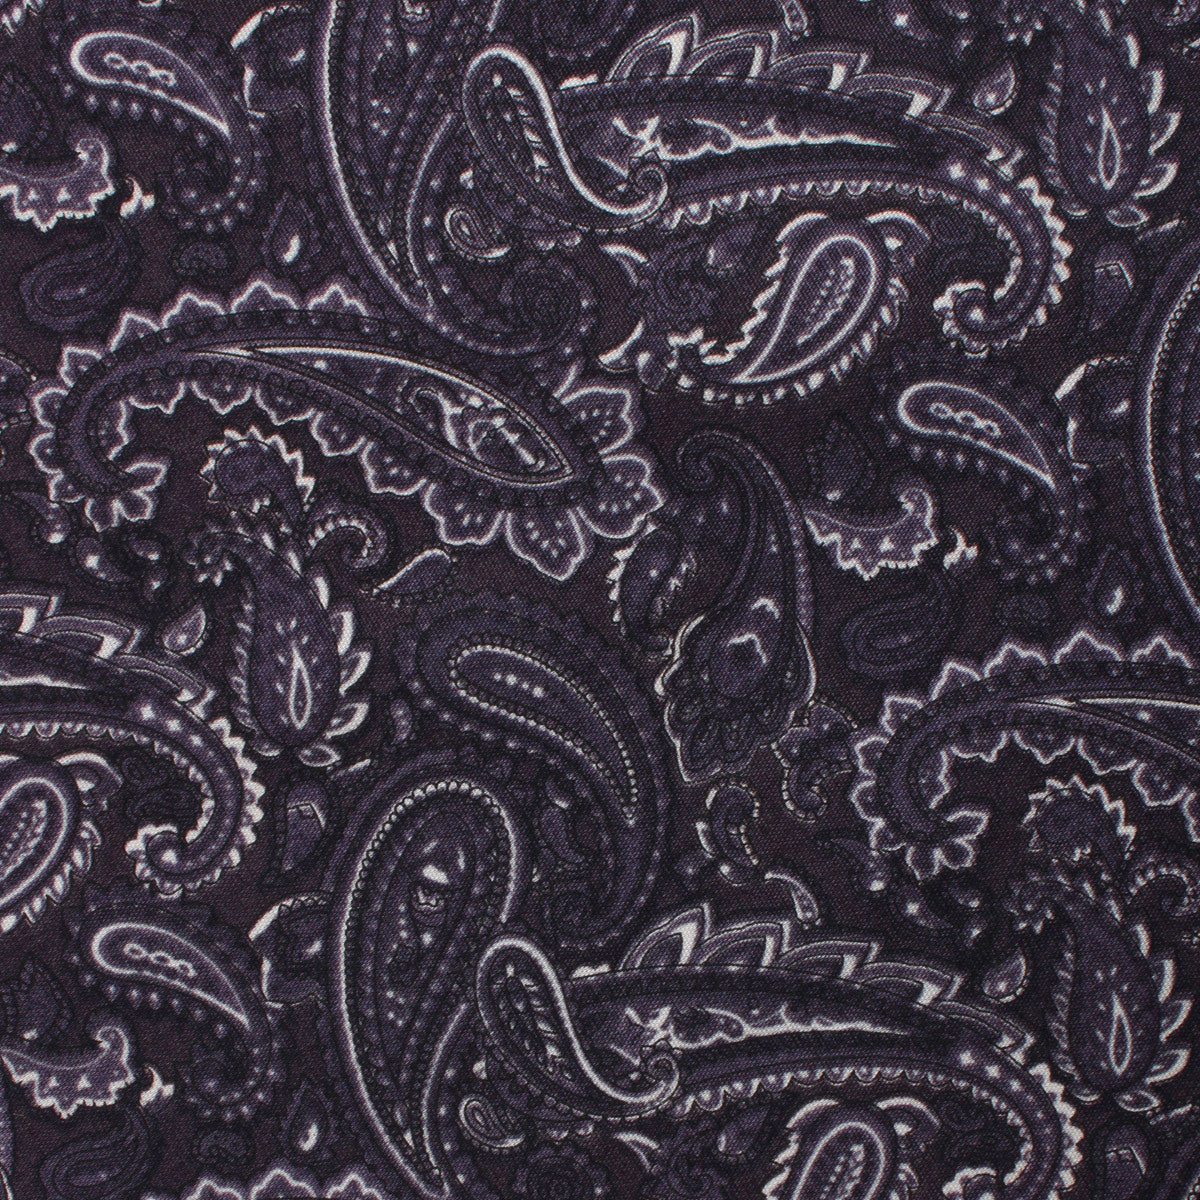 Culaccino Kettle Black Paisley Fabric Mens Bow Tie